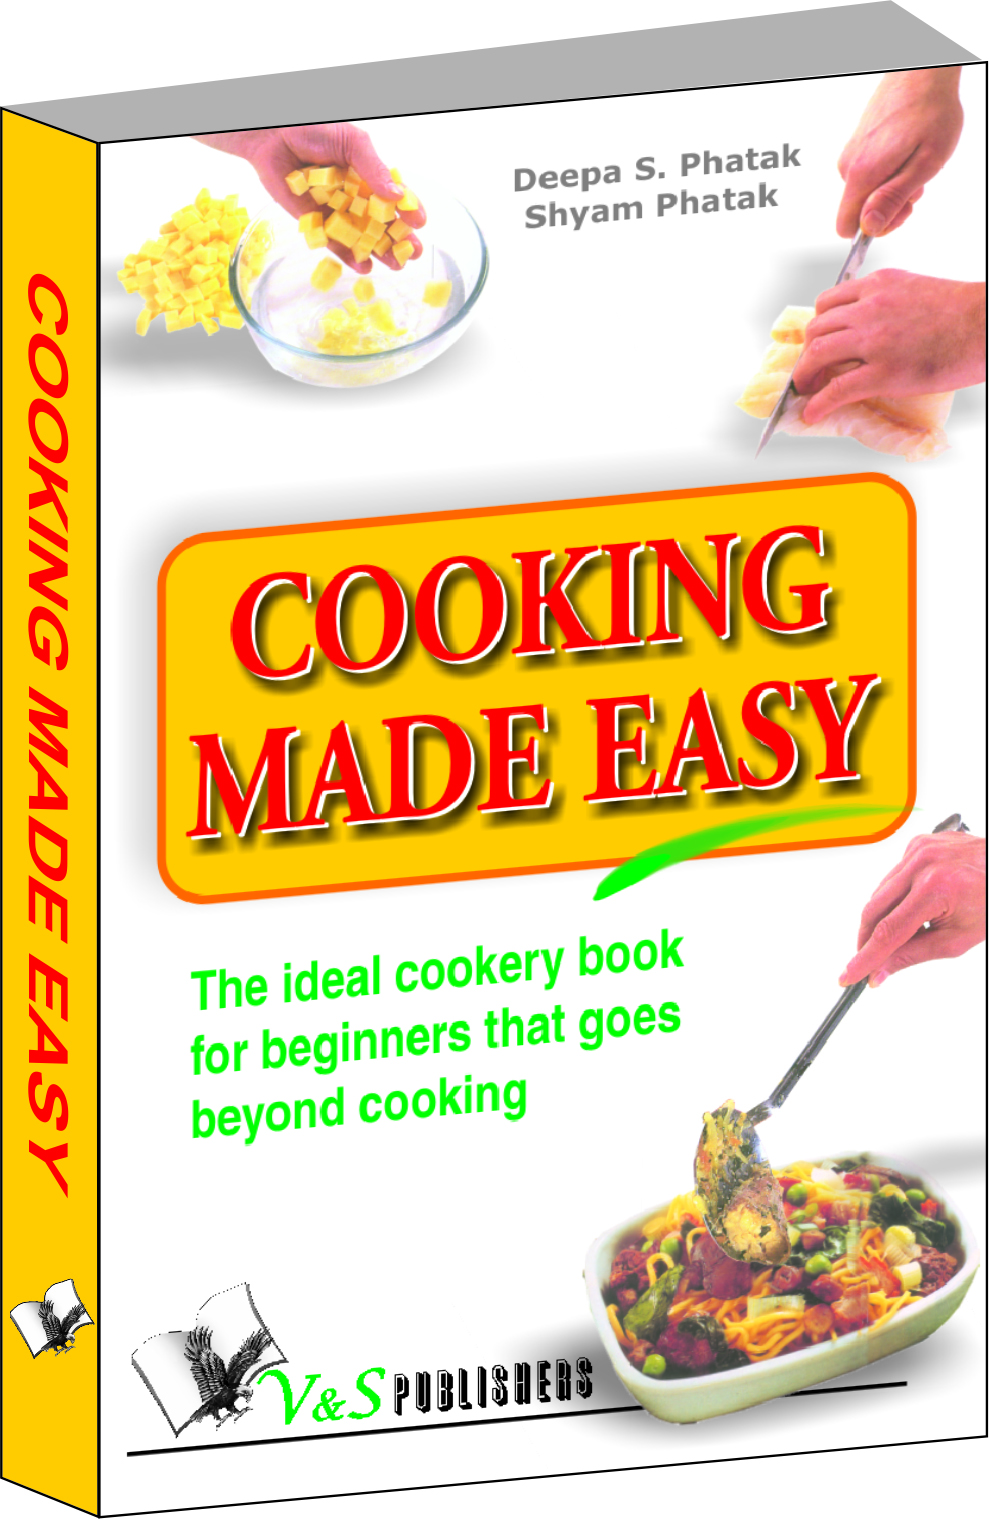 Cooking Made Easy-The ideal cookery book for beginners that goes beyond cooking